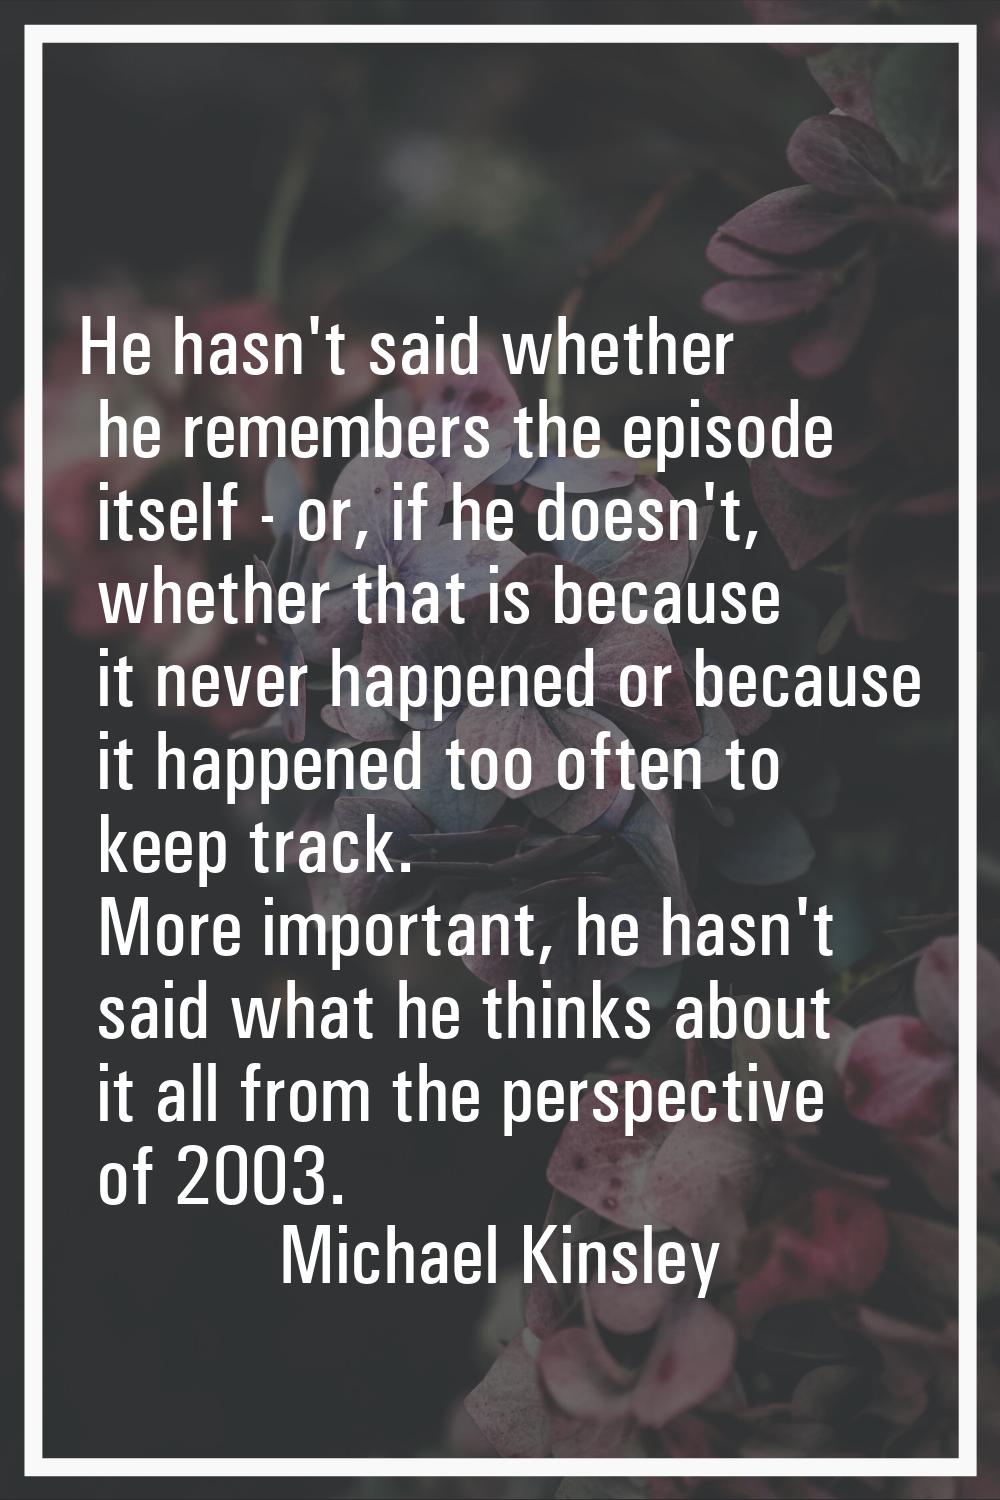 He hasn't said whether he remembers the episode itself - or, if he doesn't, whether that is because